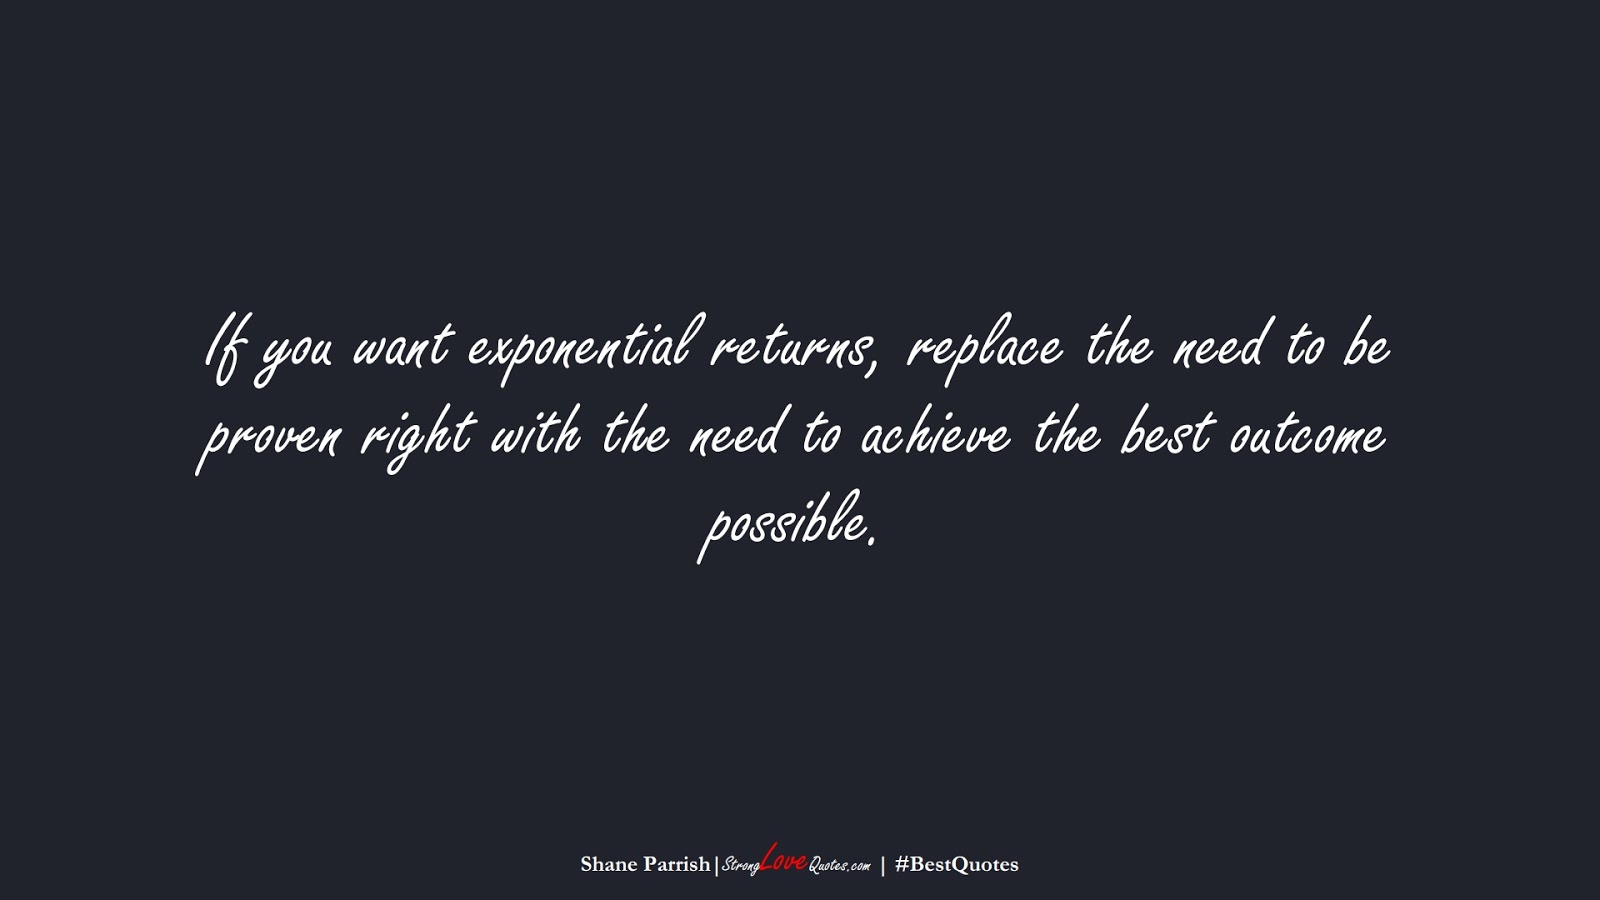 If you want exponential returns, replace the need to be proven right with the need to achieve the best outcome possible. (Shane Parrish);  #BestQuotes